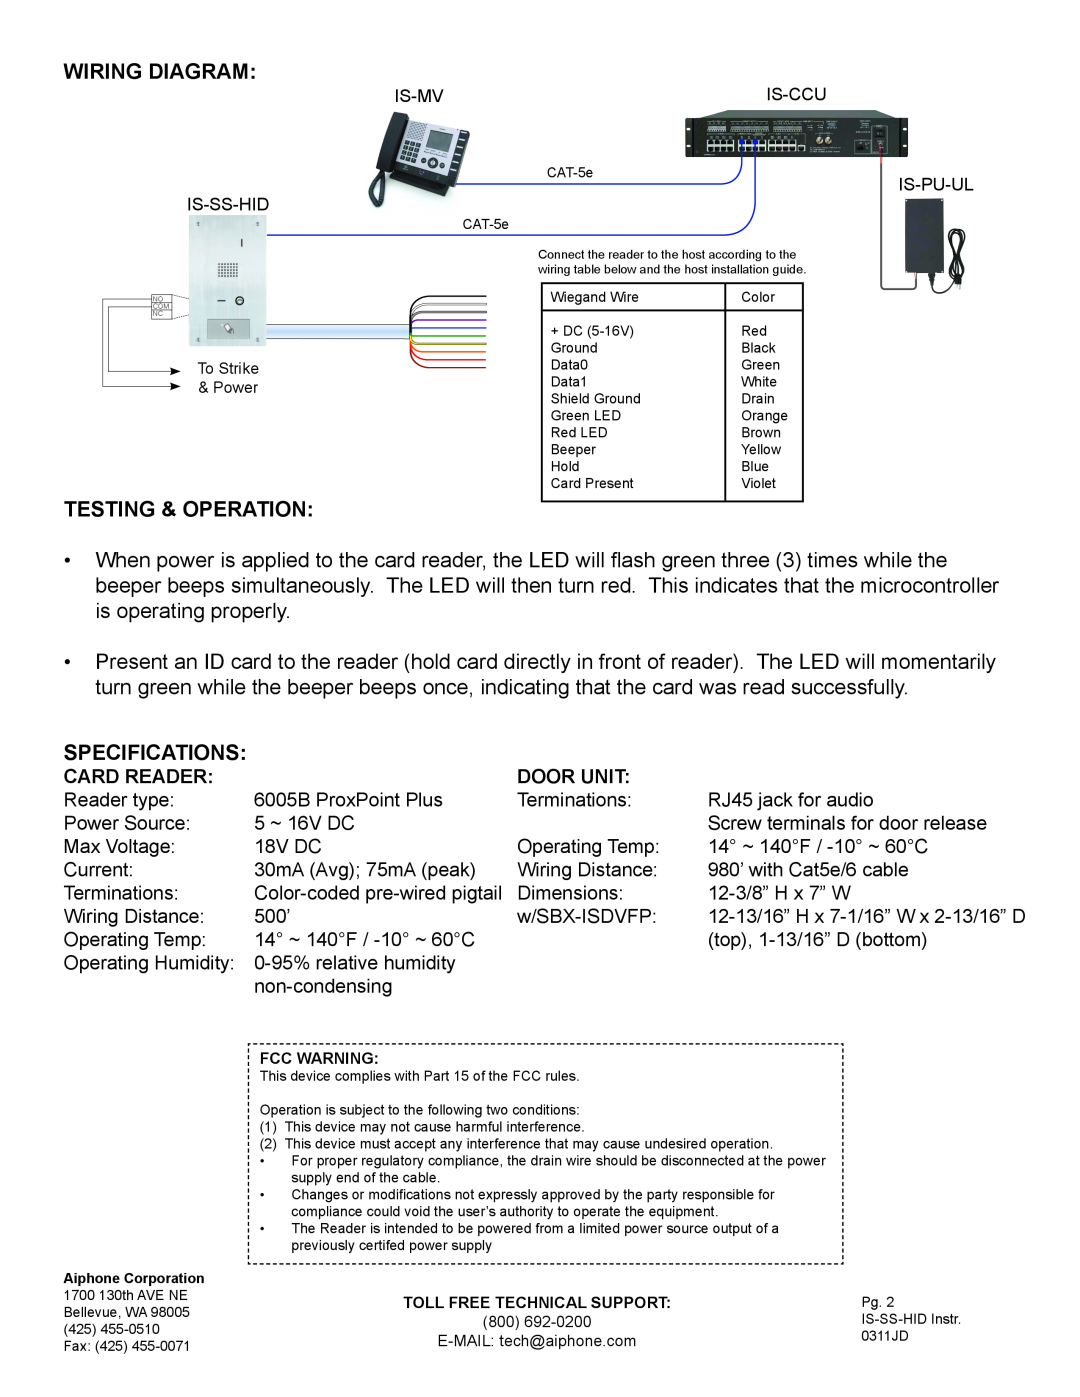 Aiphone IS-SS-HID dimensions Wiring Diagram, Testing & Operation, Specifications, Card Reader, Door Unit 